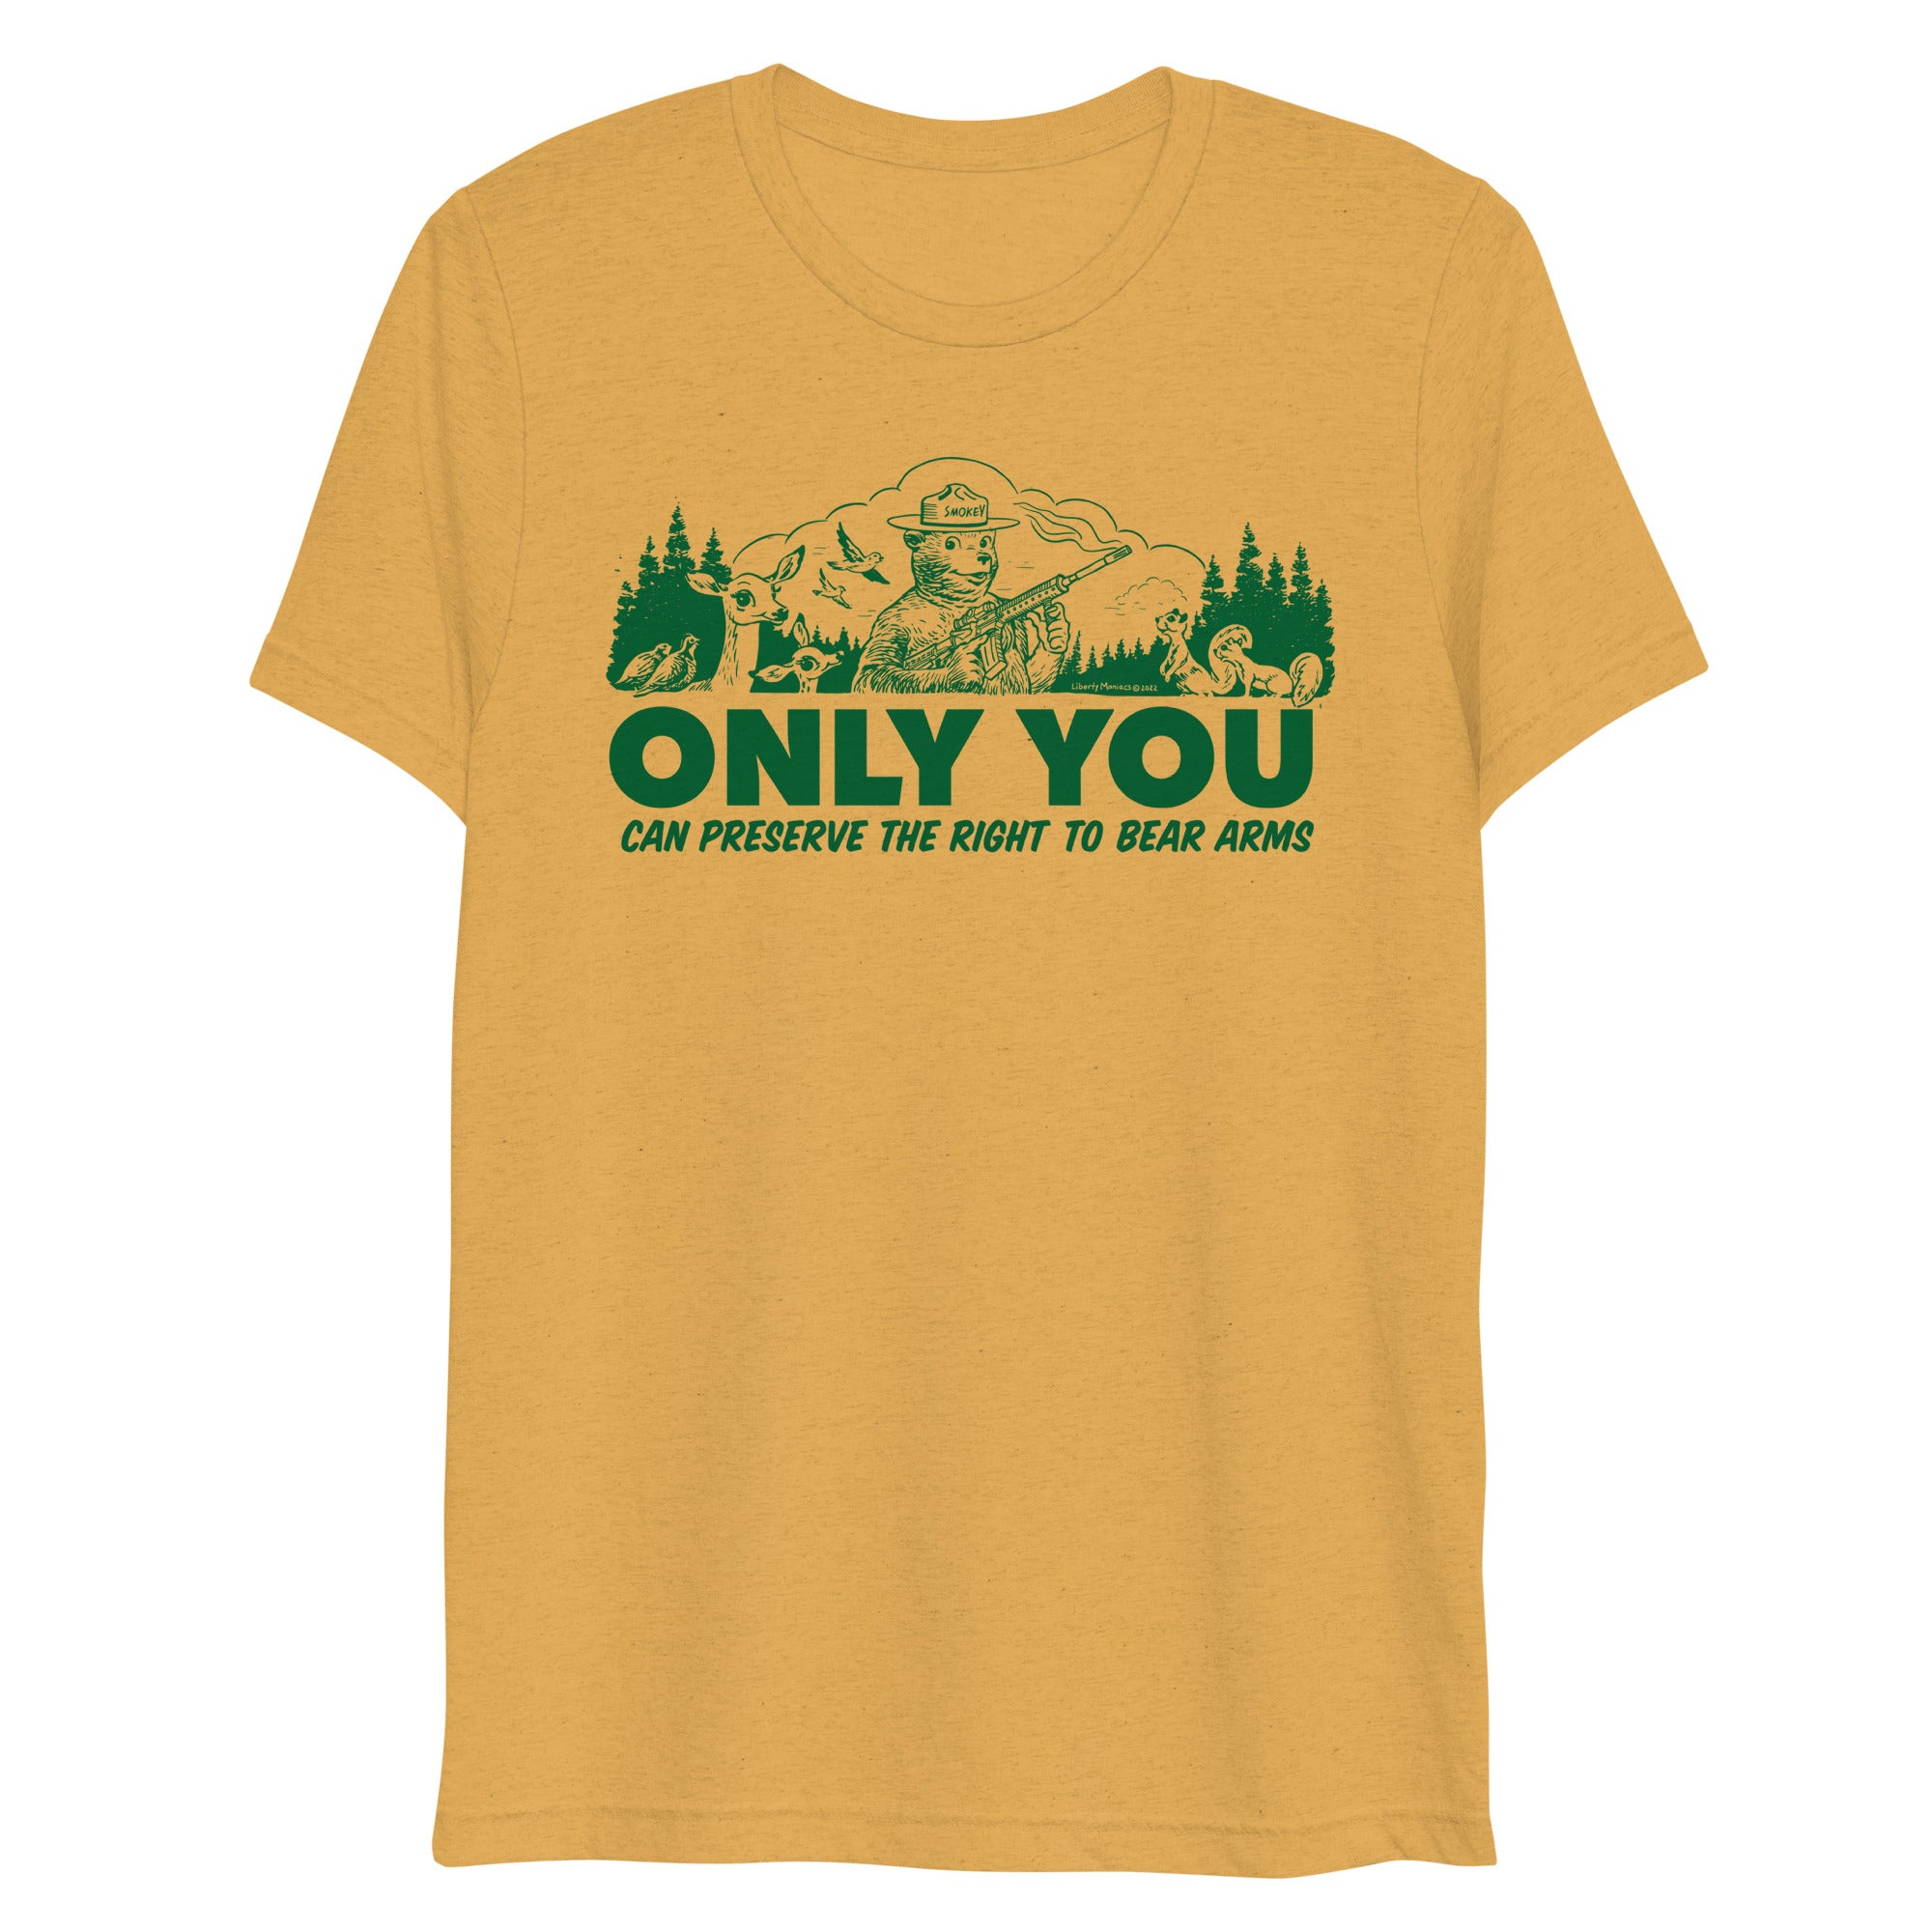 Only You Can Preserve the Right To Bear Arms Retro Smokey Tri-blend track shirt